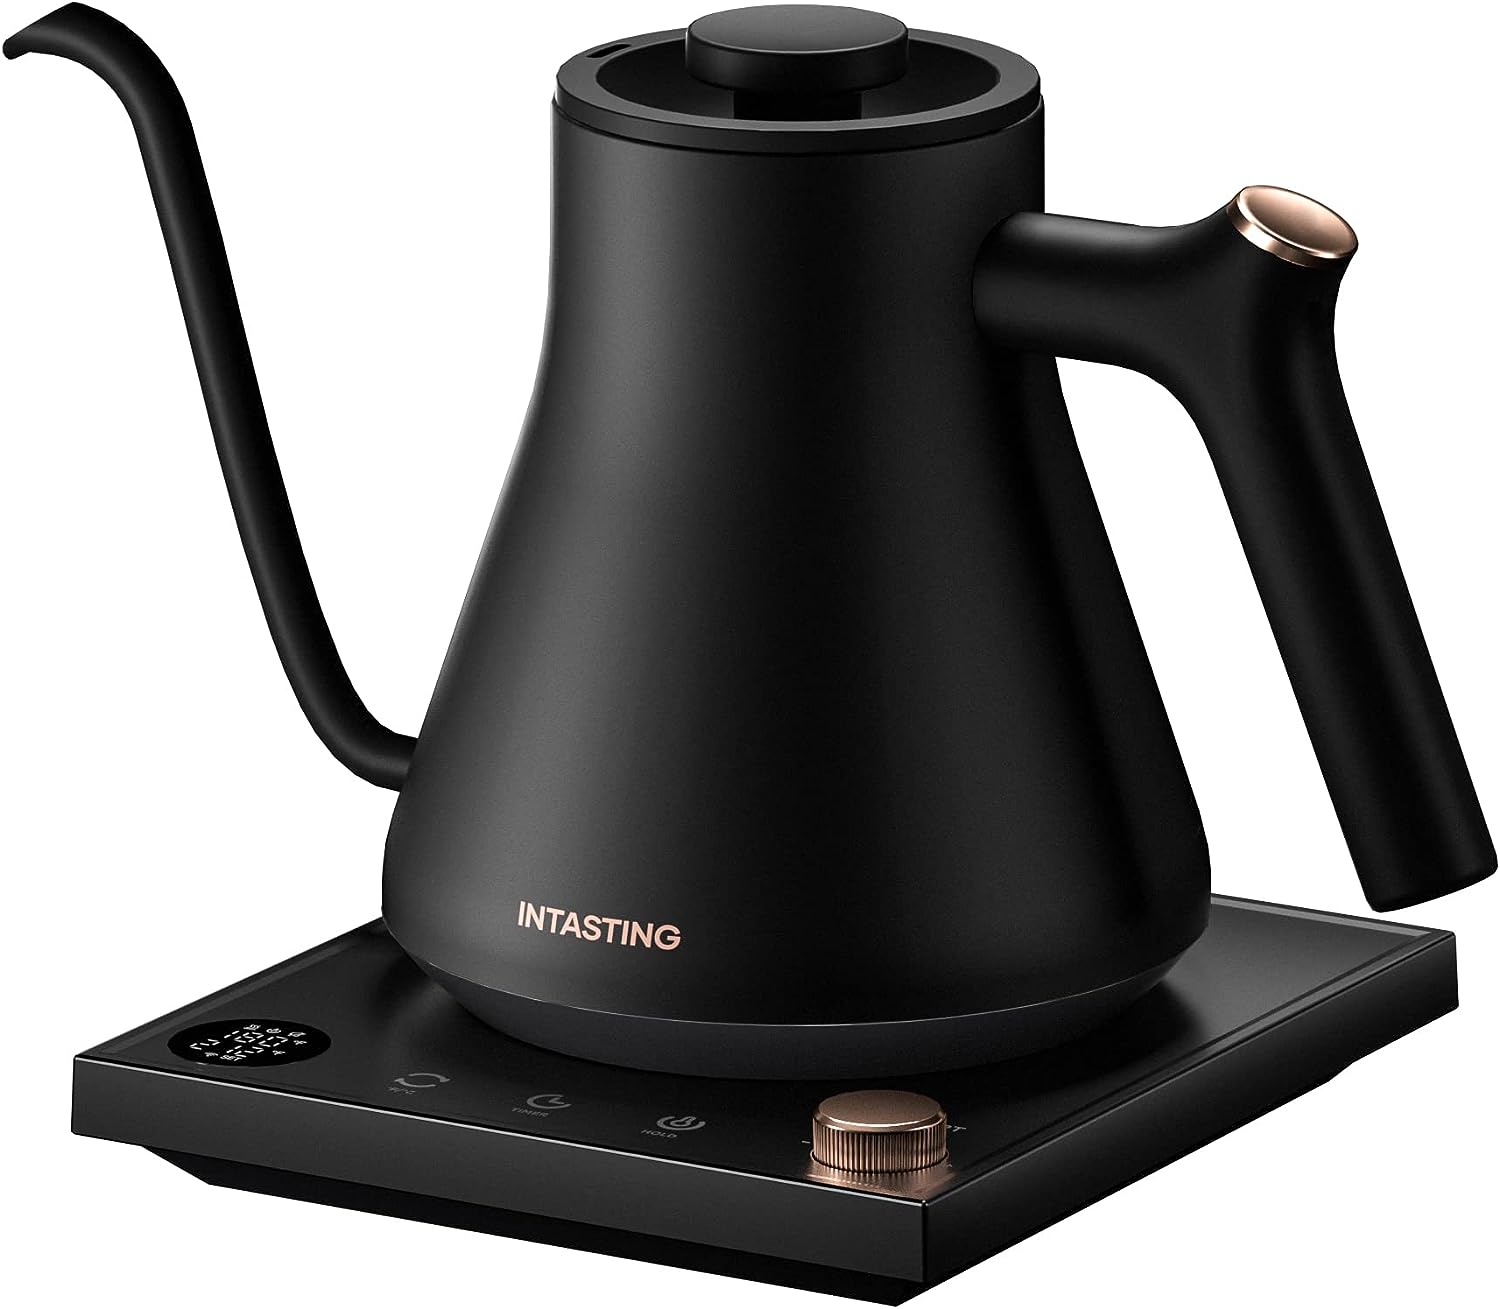 Electric Kettles, INTASTING Gooseneck Electric Kettle, ±1℉ Temperature Control, Stainless Steel Inner, Quick Heating, for Pour Over Coffee, Brew Tea, Boil Hot Water, 0.9L Black